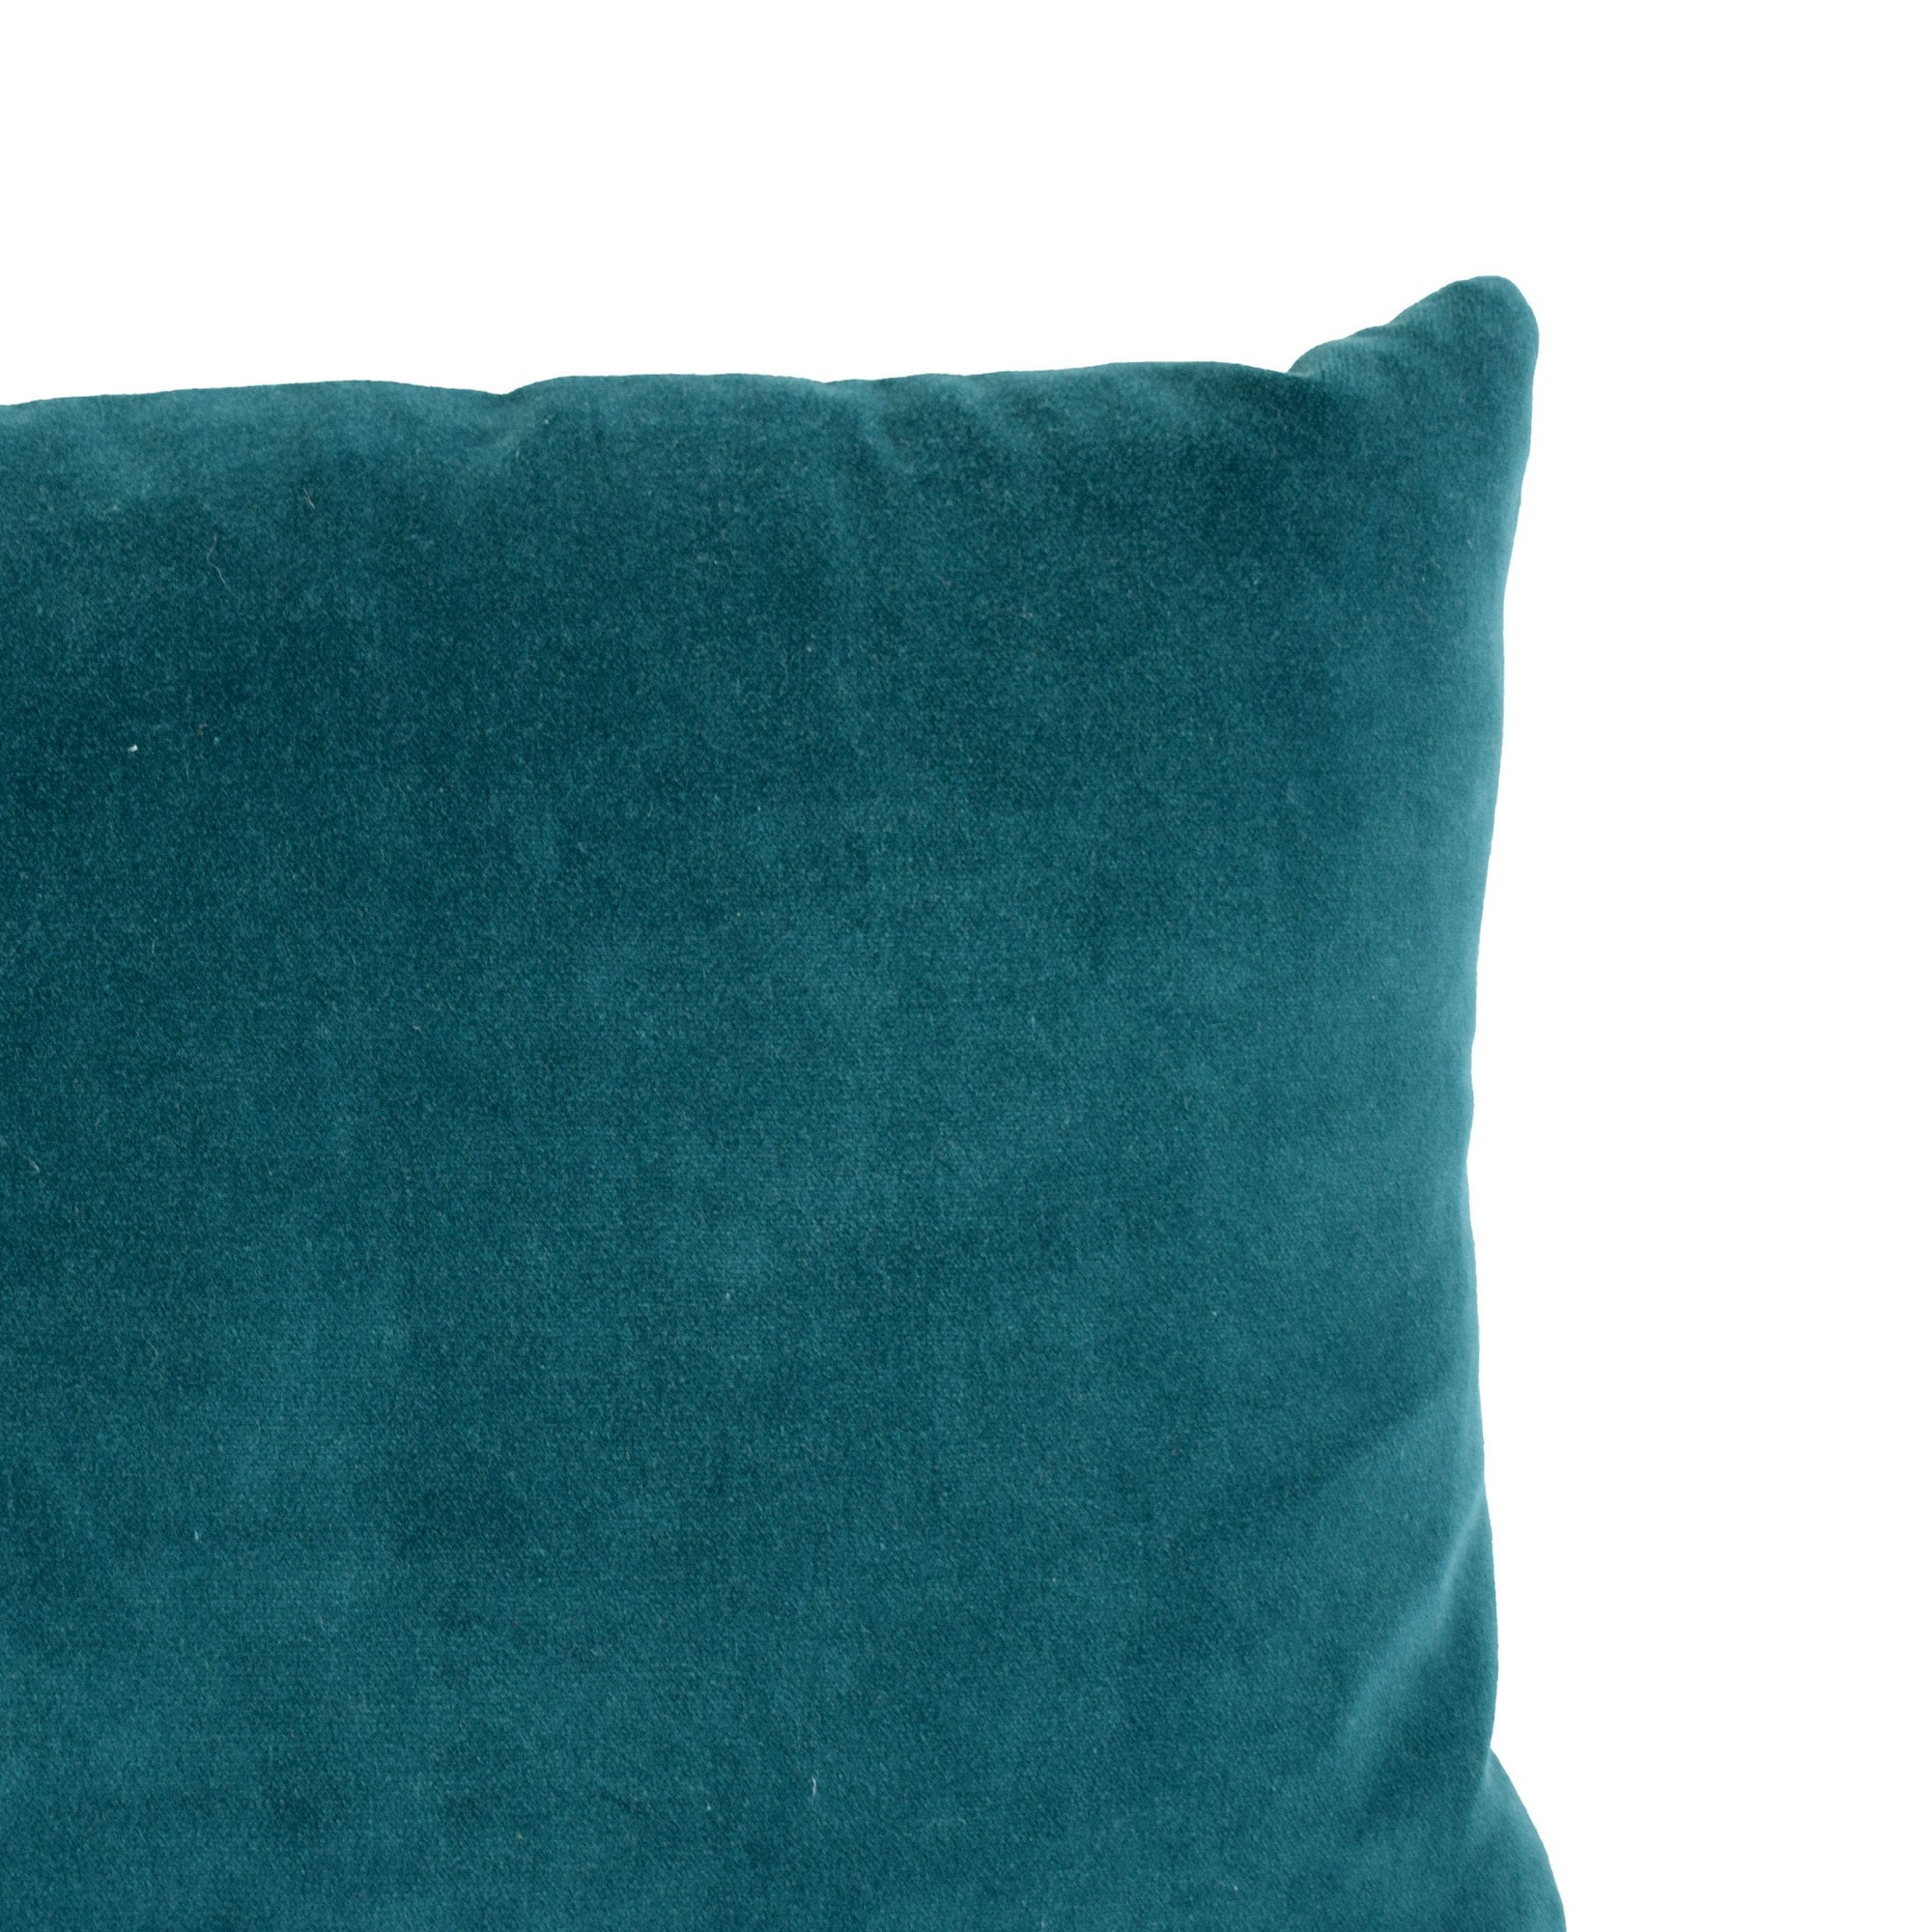 Joy of Print Ric Rac Scallop Embroidered Cushion Teal